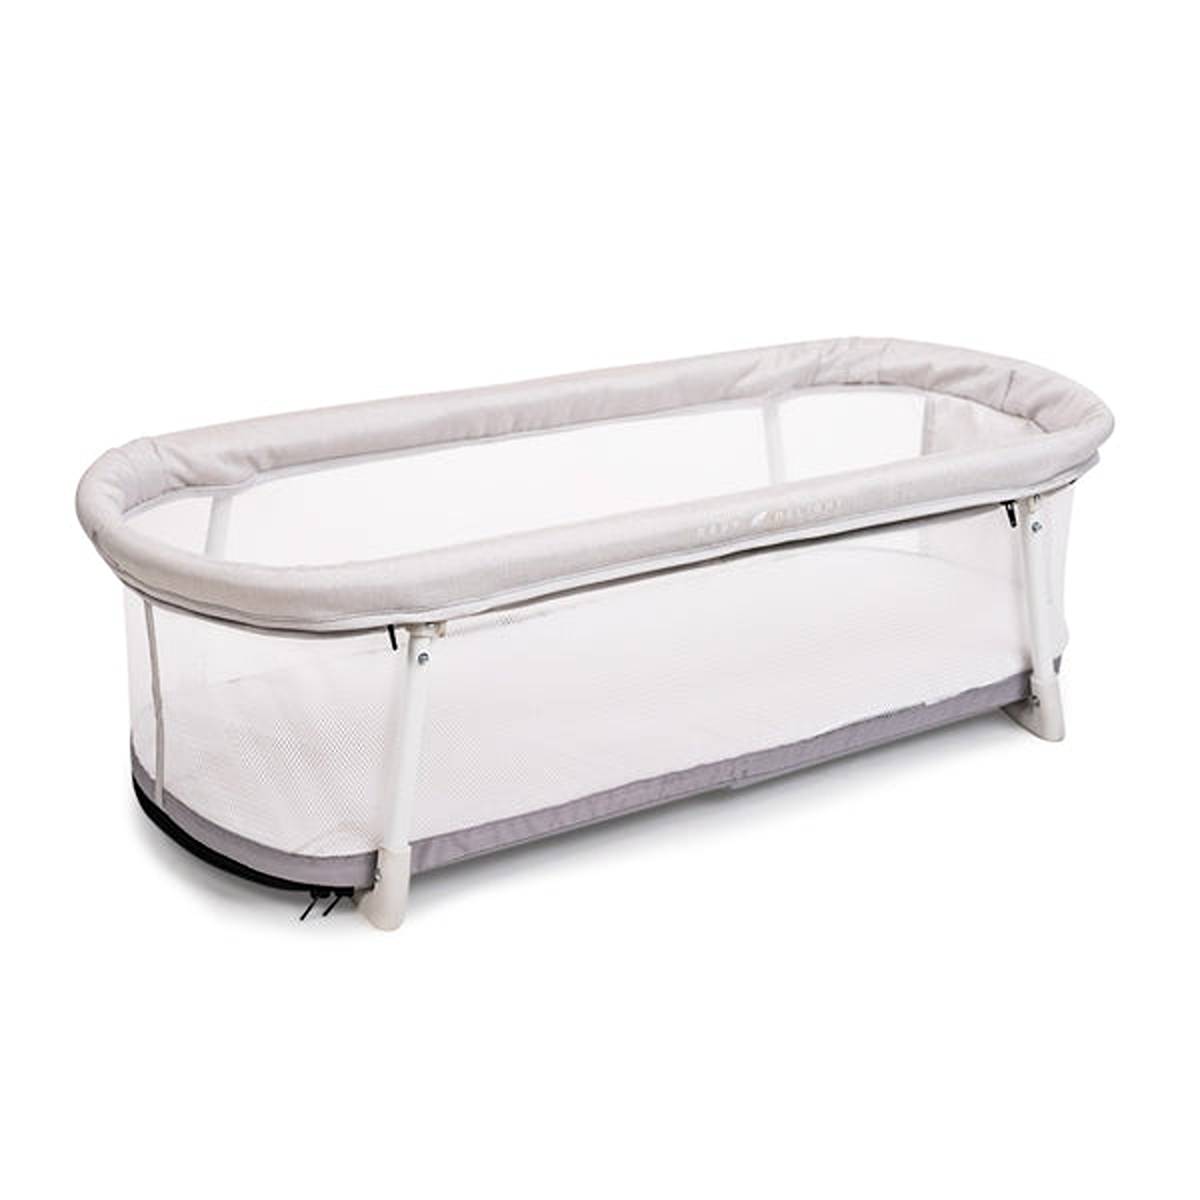 Baby Delight The Snuggle Nest Portable Bassinet, 819956001982 - ANB Baby